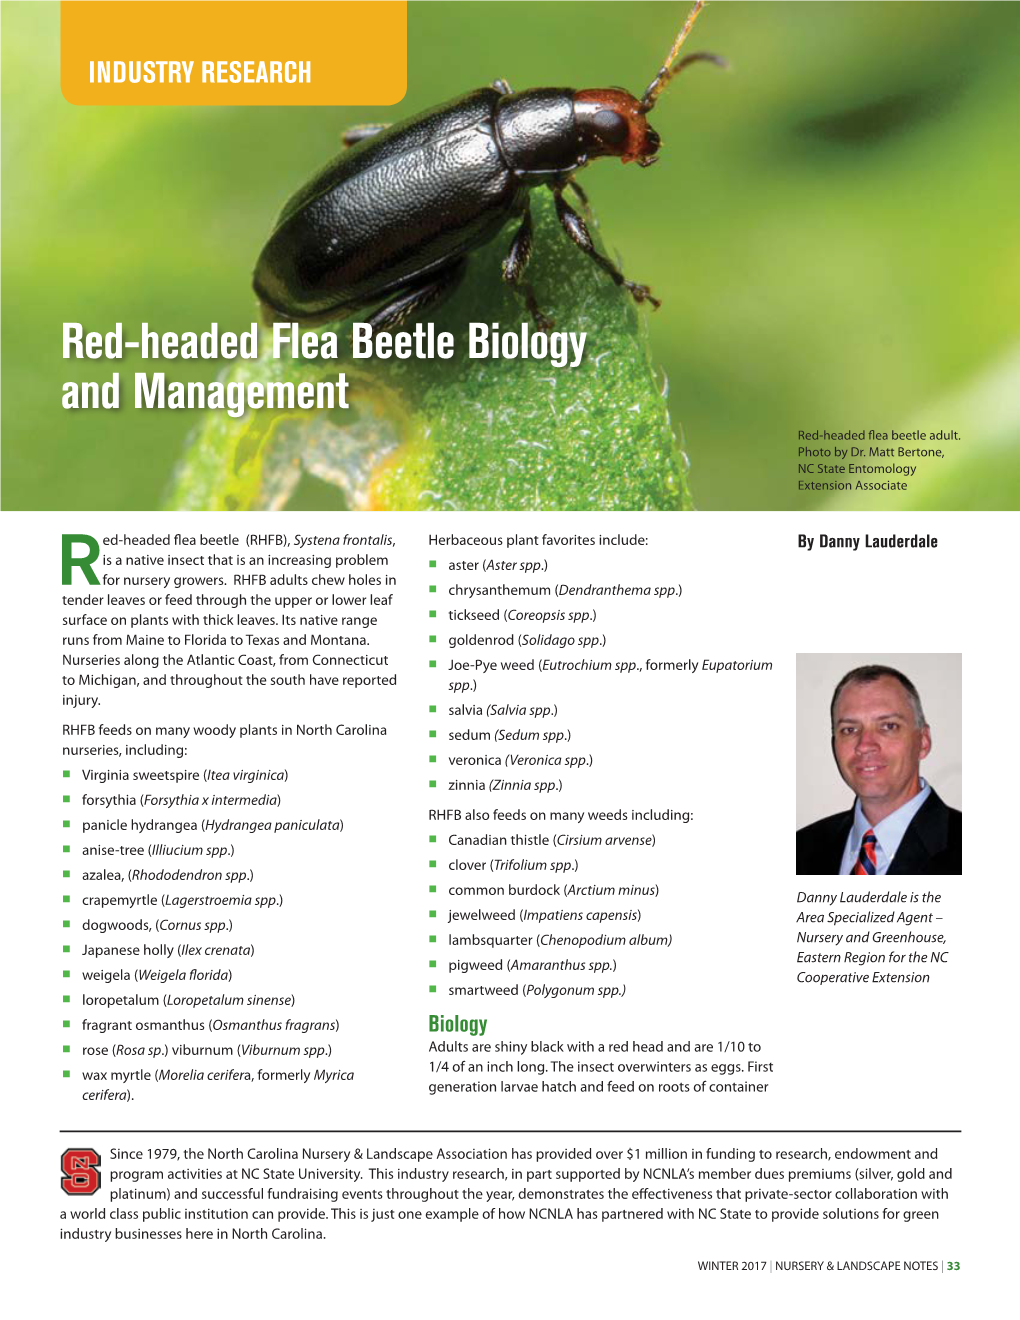 Red-Headed Flea Beetle Biology and Management Red-Headed Fea Beetle Adult